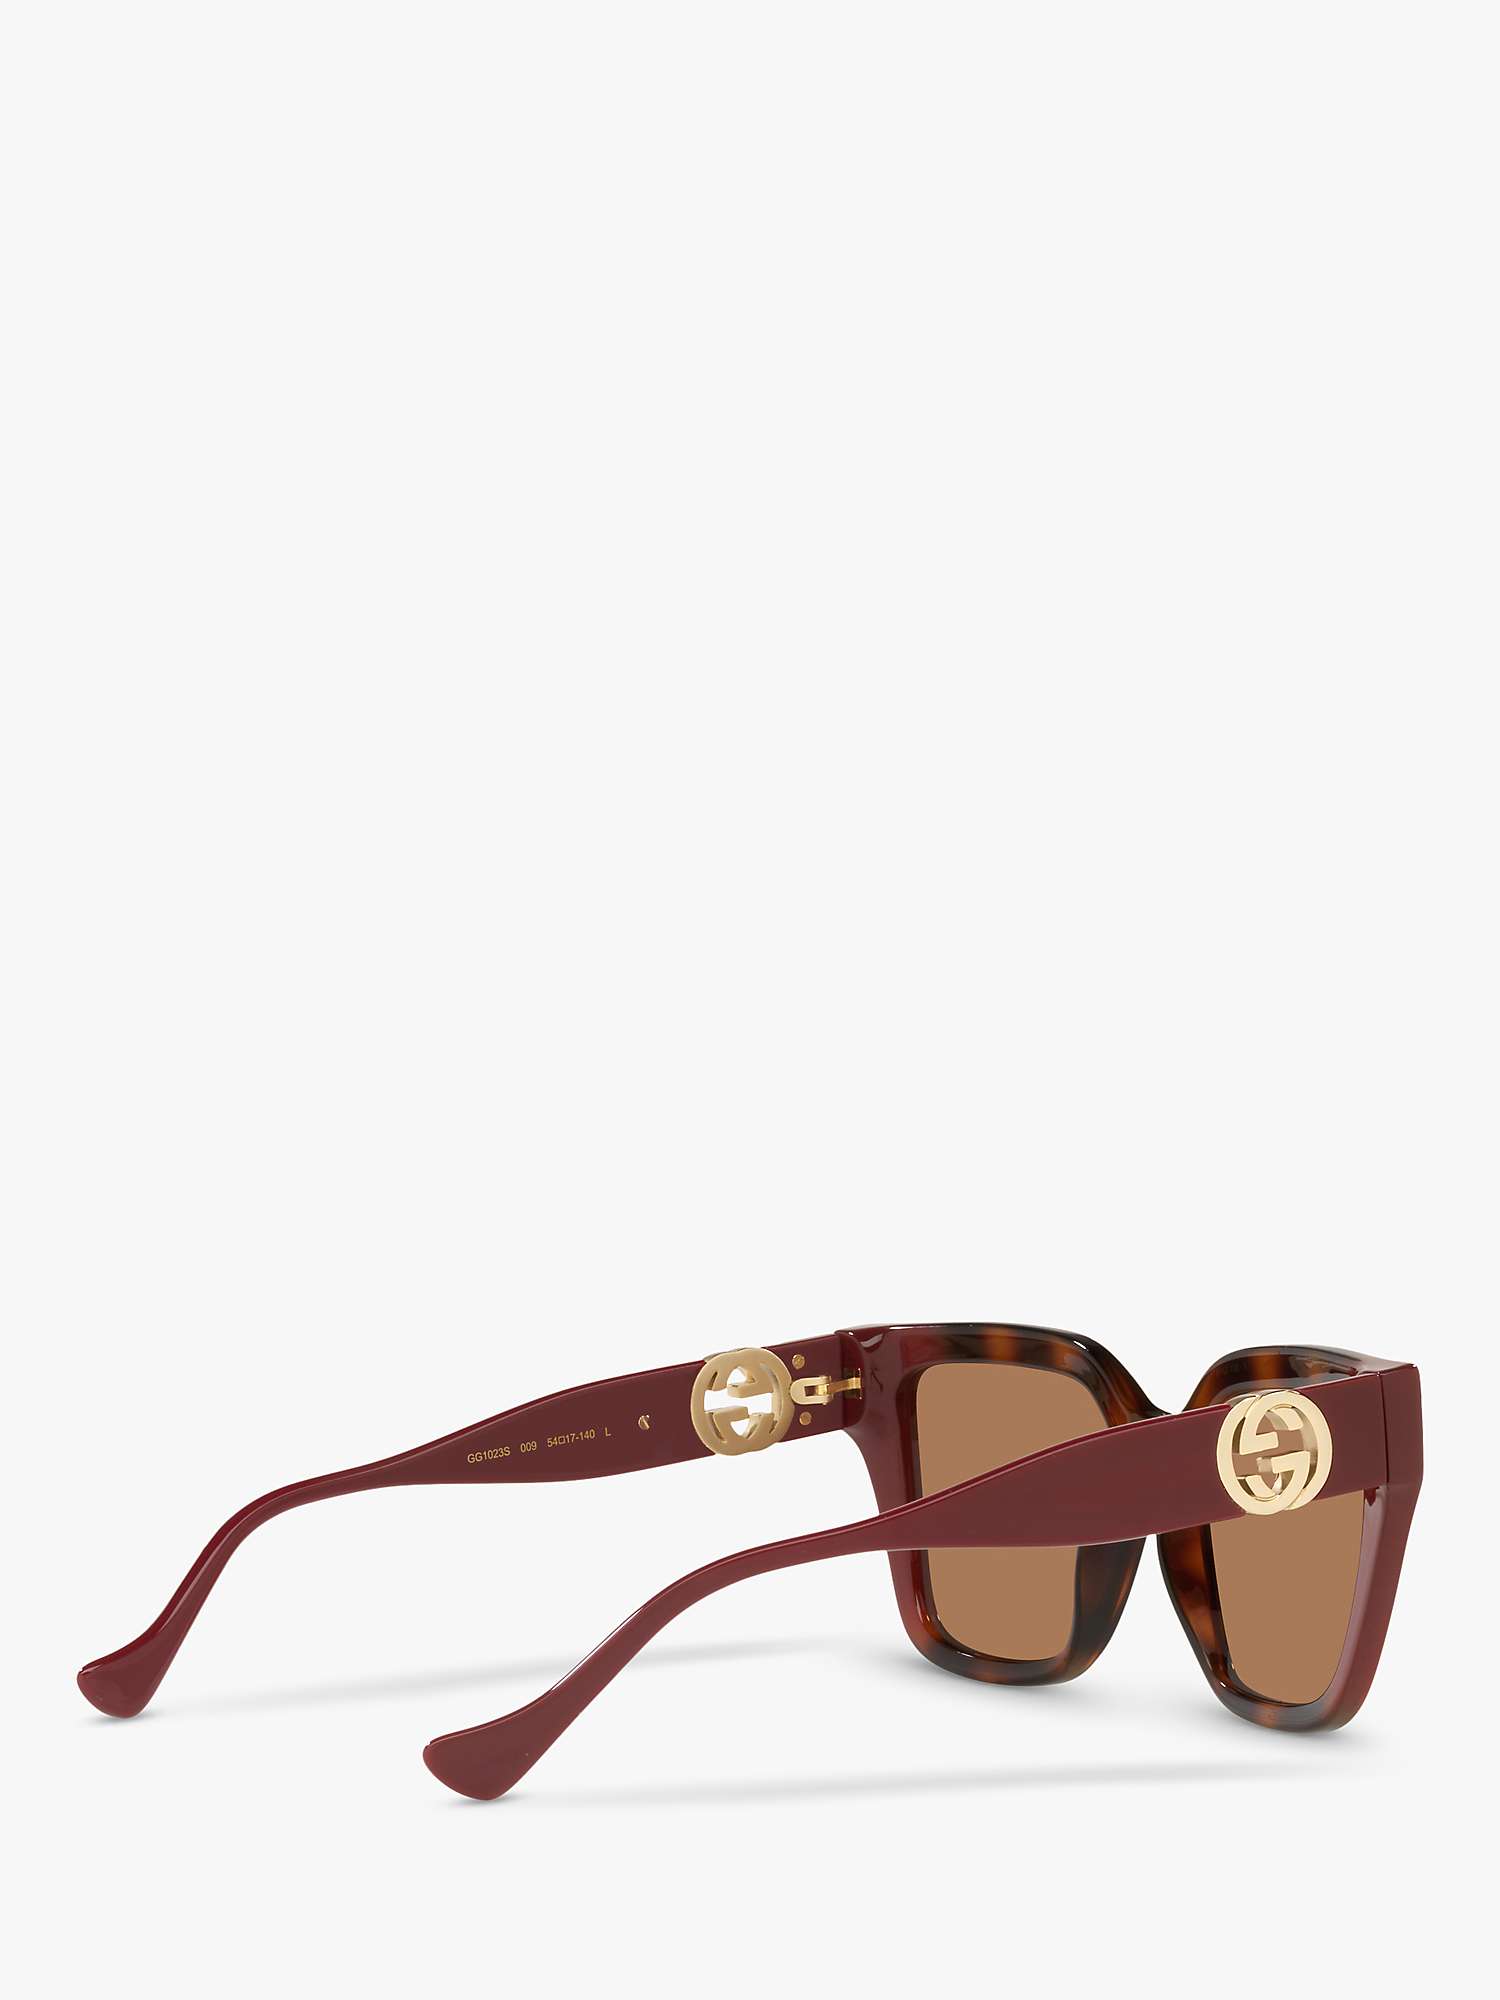 Buy Gucci GG1023S Women's D-Frame Sunglasses, Brown Red/Brown Online at johnlewis.com